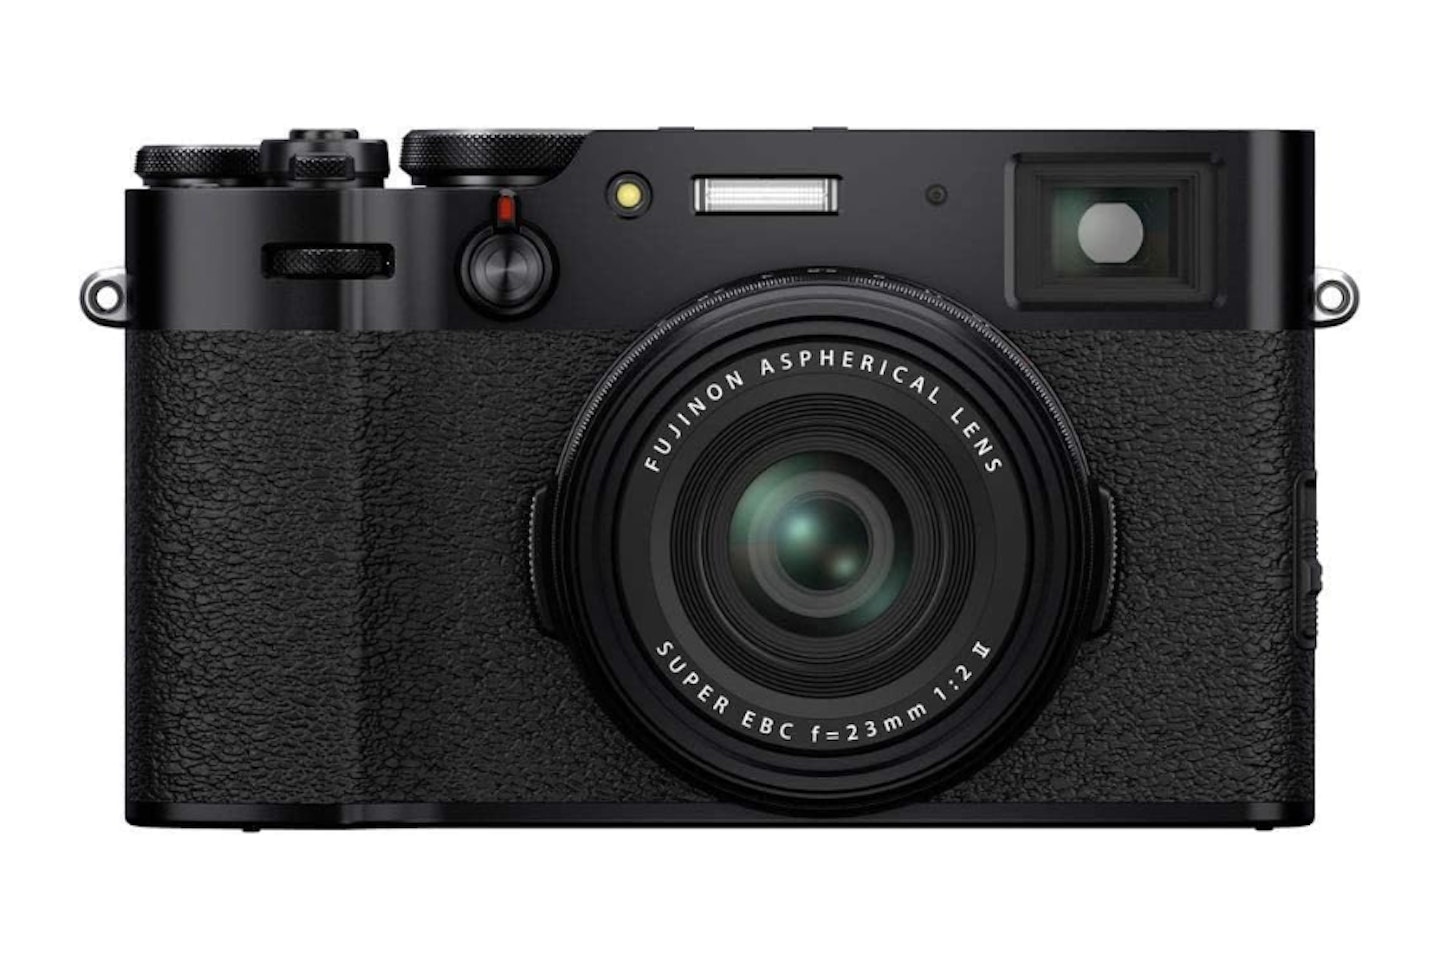 Fujifilm X100V Mirrorless Digital Camera - one of the best point and shoot cameras